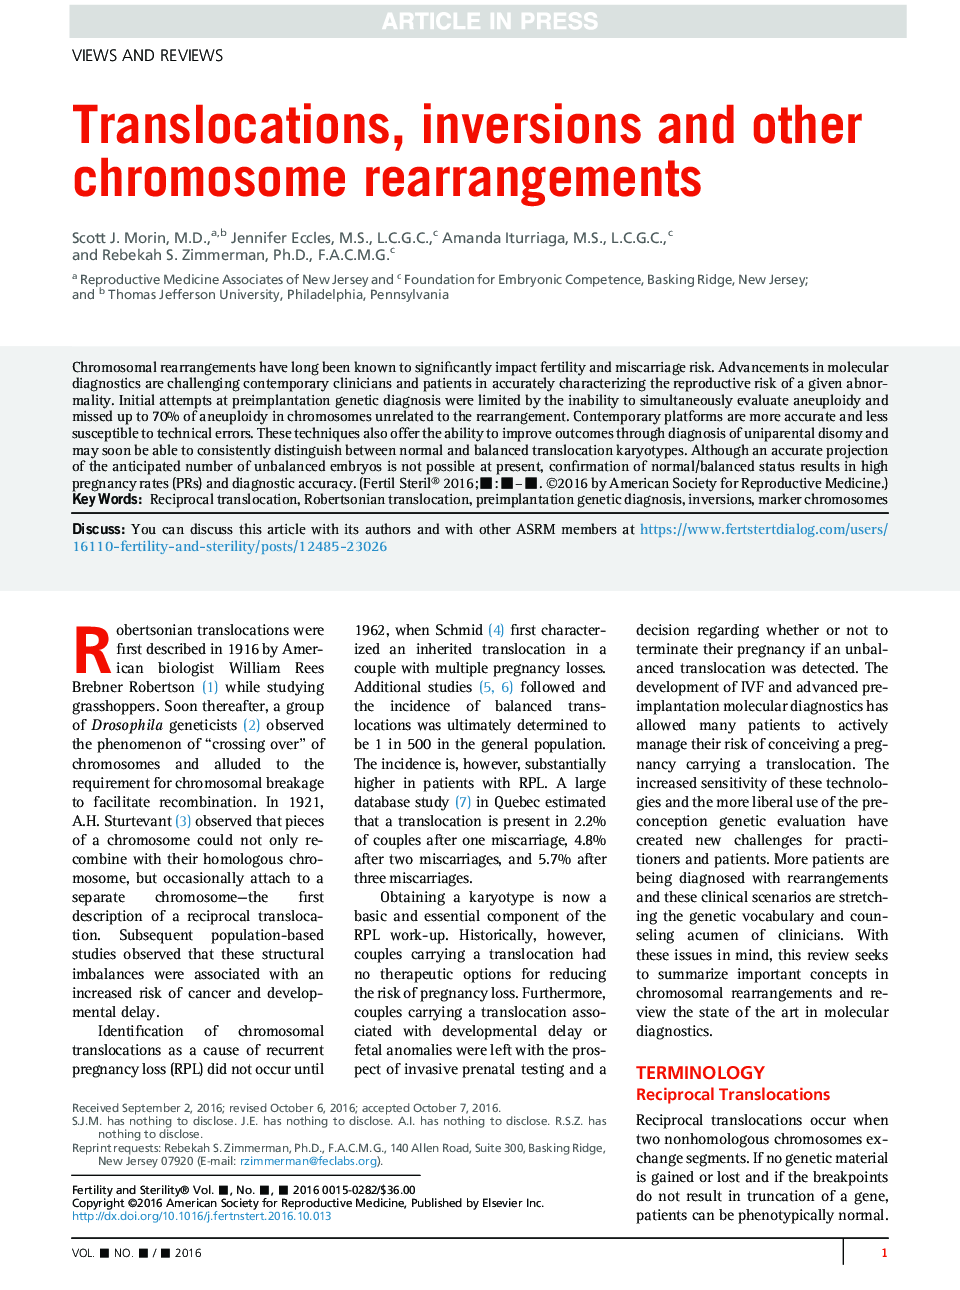 Translocations, inversions and other chromosome rearrangements